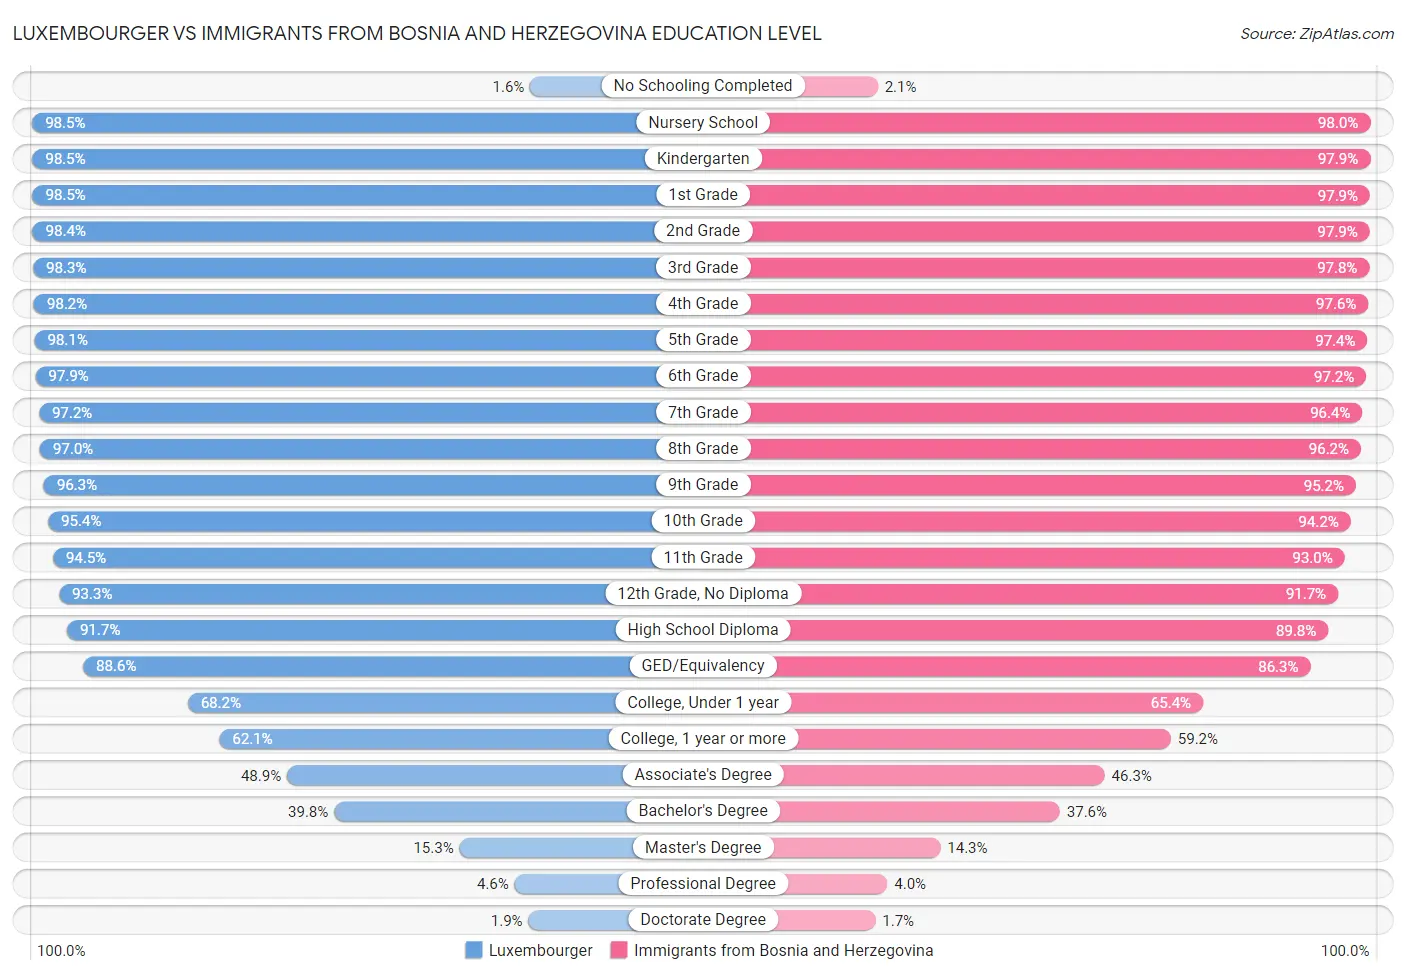 Luxembourger vs Immigrants from Bosnia and Herzegovina Education Level